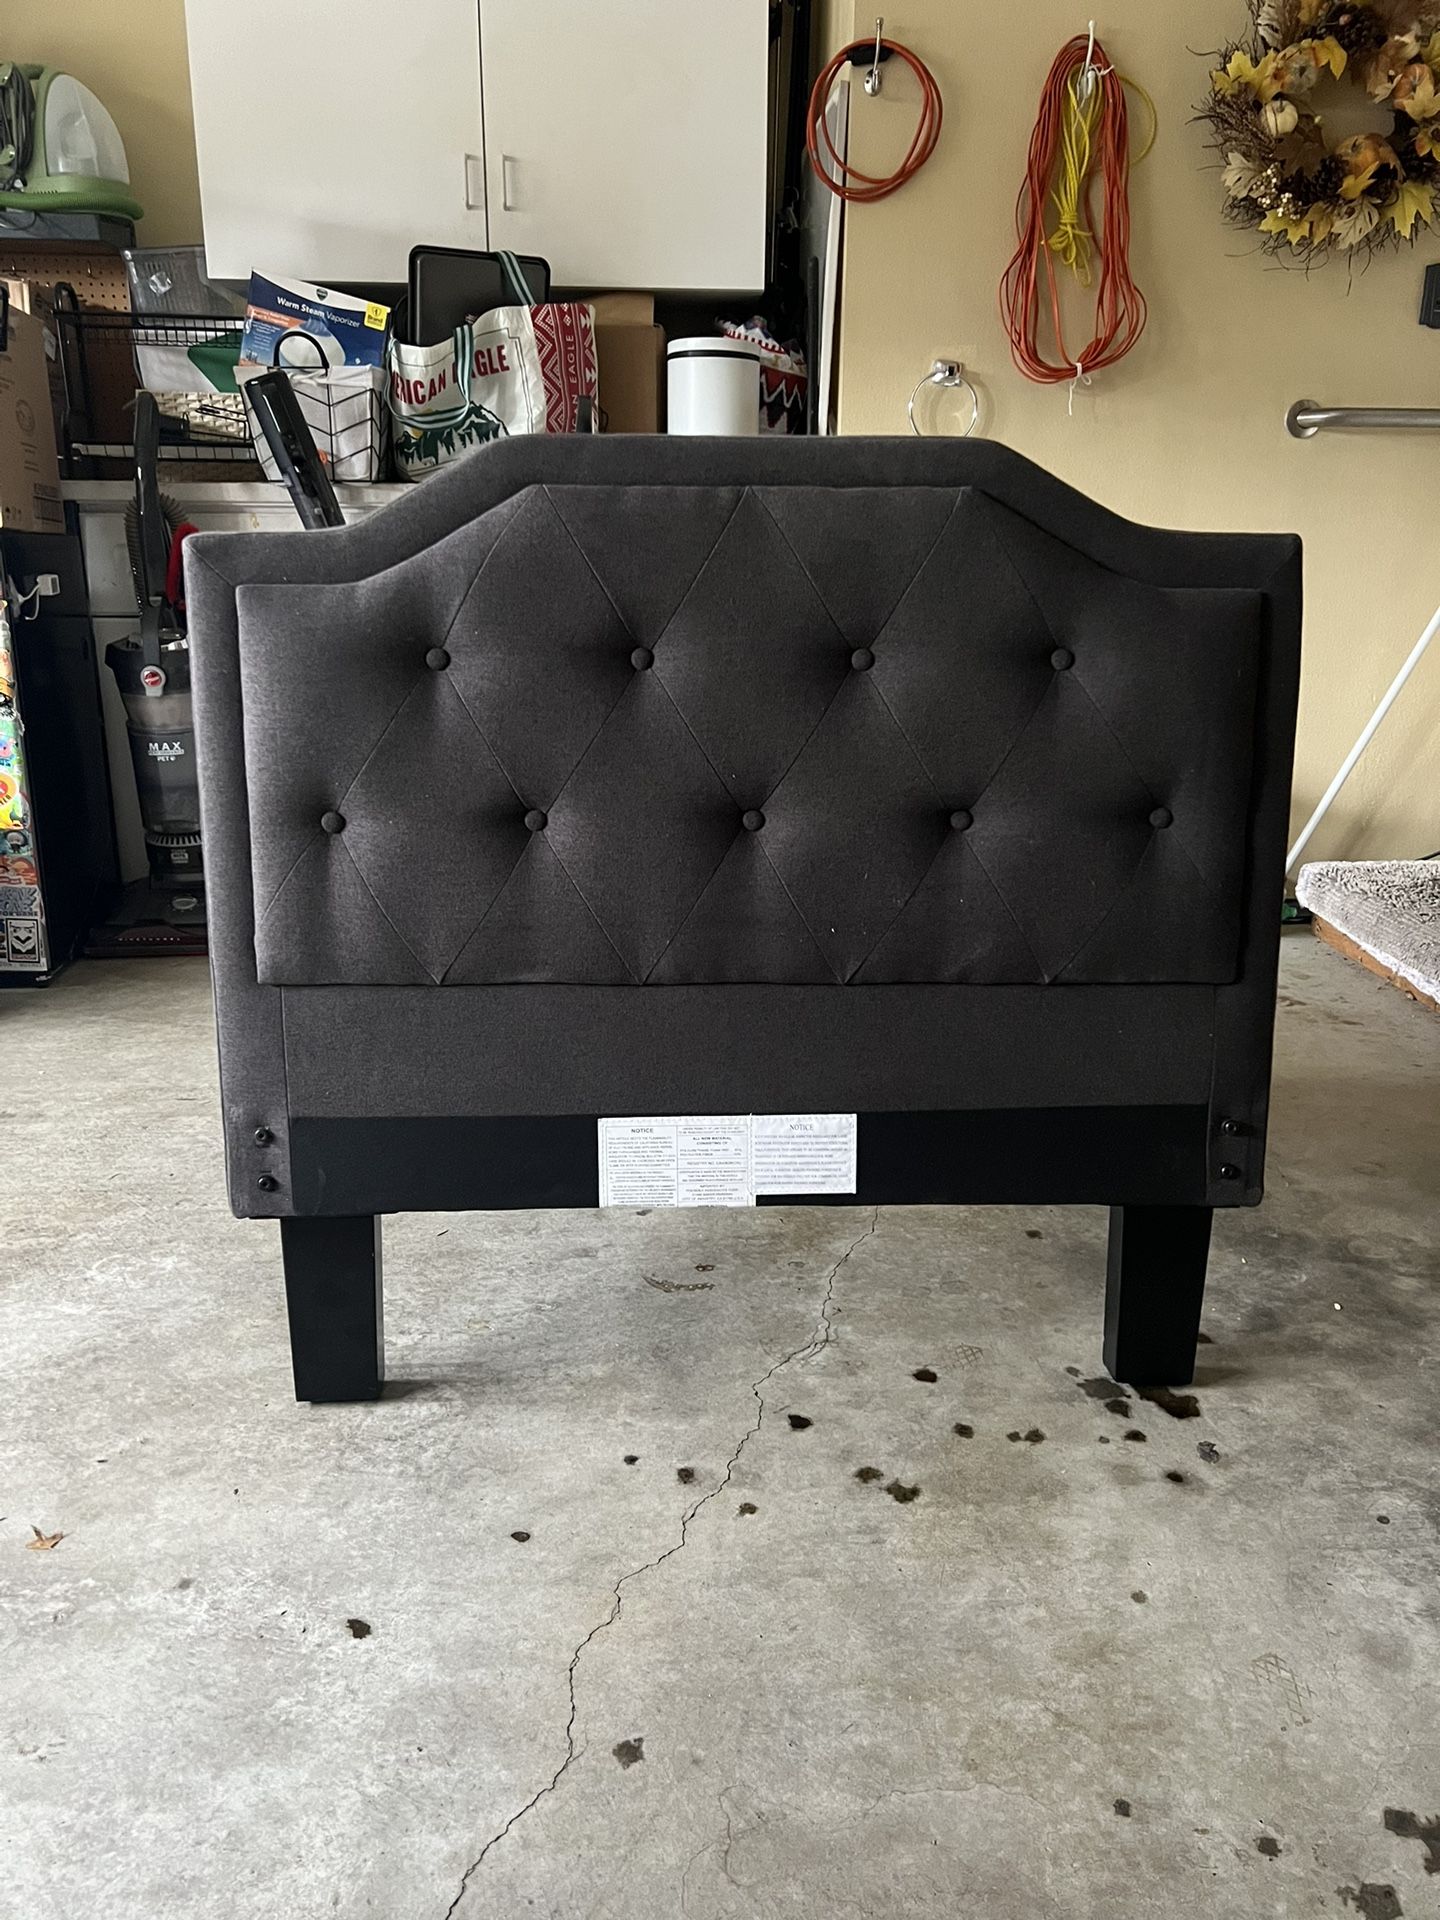 Upholstered twin Bed Frame